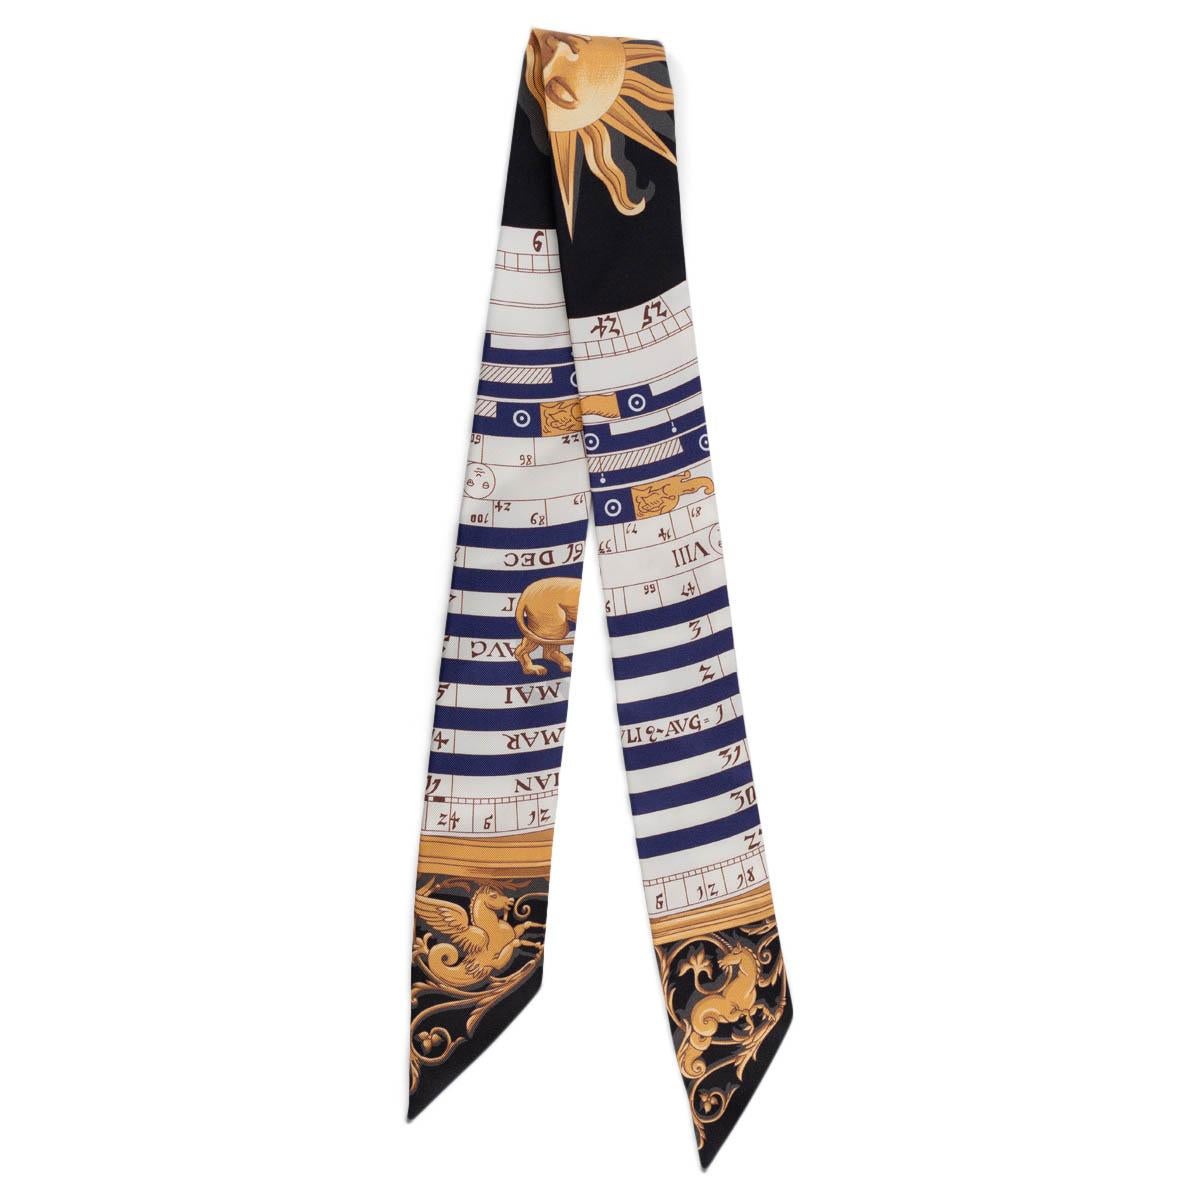 100% authentic Hermès Astrologie silk twilly in black, navy blue, white and gold. Has been worn and is in excellent condition.  

Measurements
Width	5cm (2in)
Length	86cm (33.5in)

All our listings include only the listed item unless otherwise